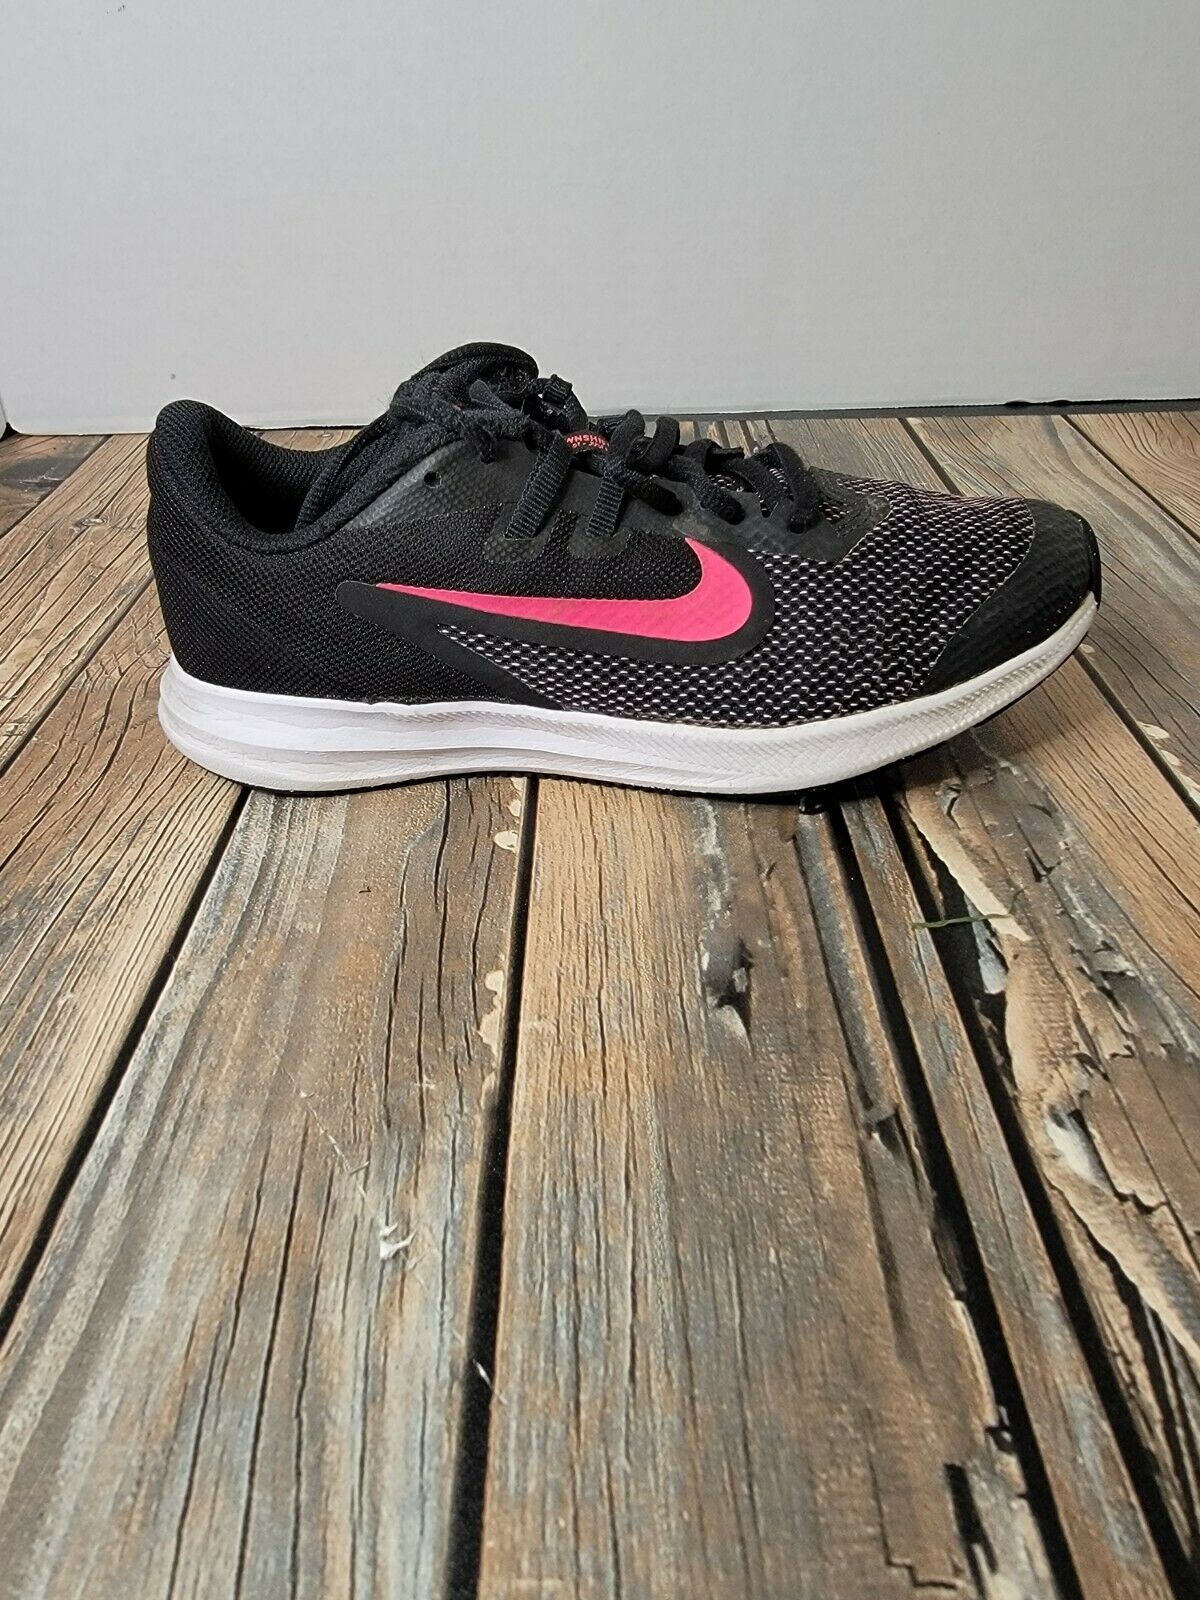 Nike Downshifter (GS) Black Pink White Girl's Shoes AR4135-003 Size 4Y